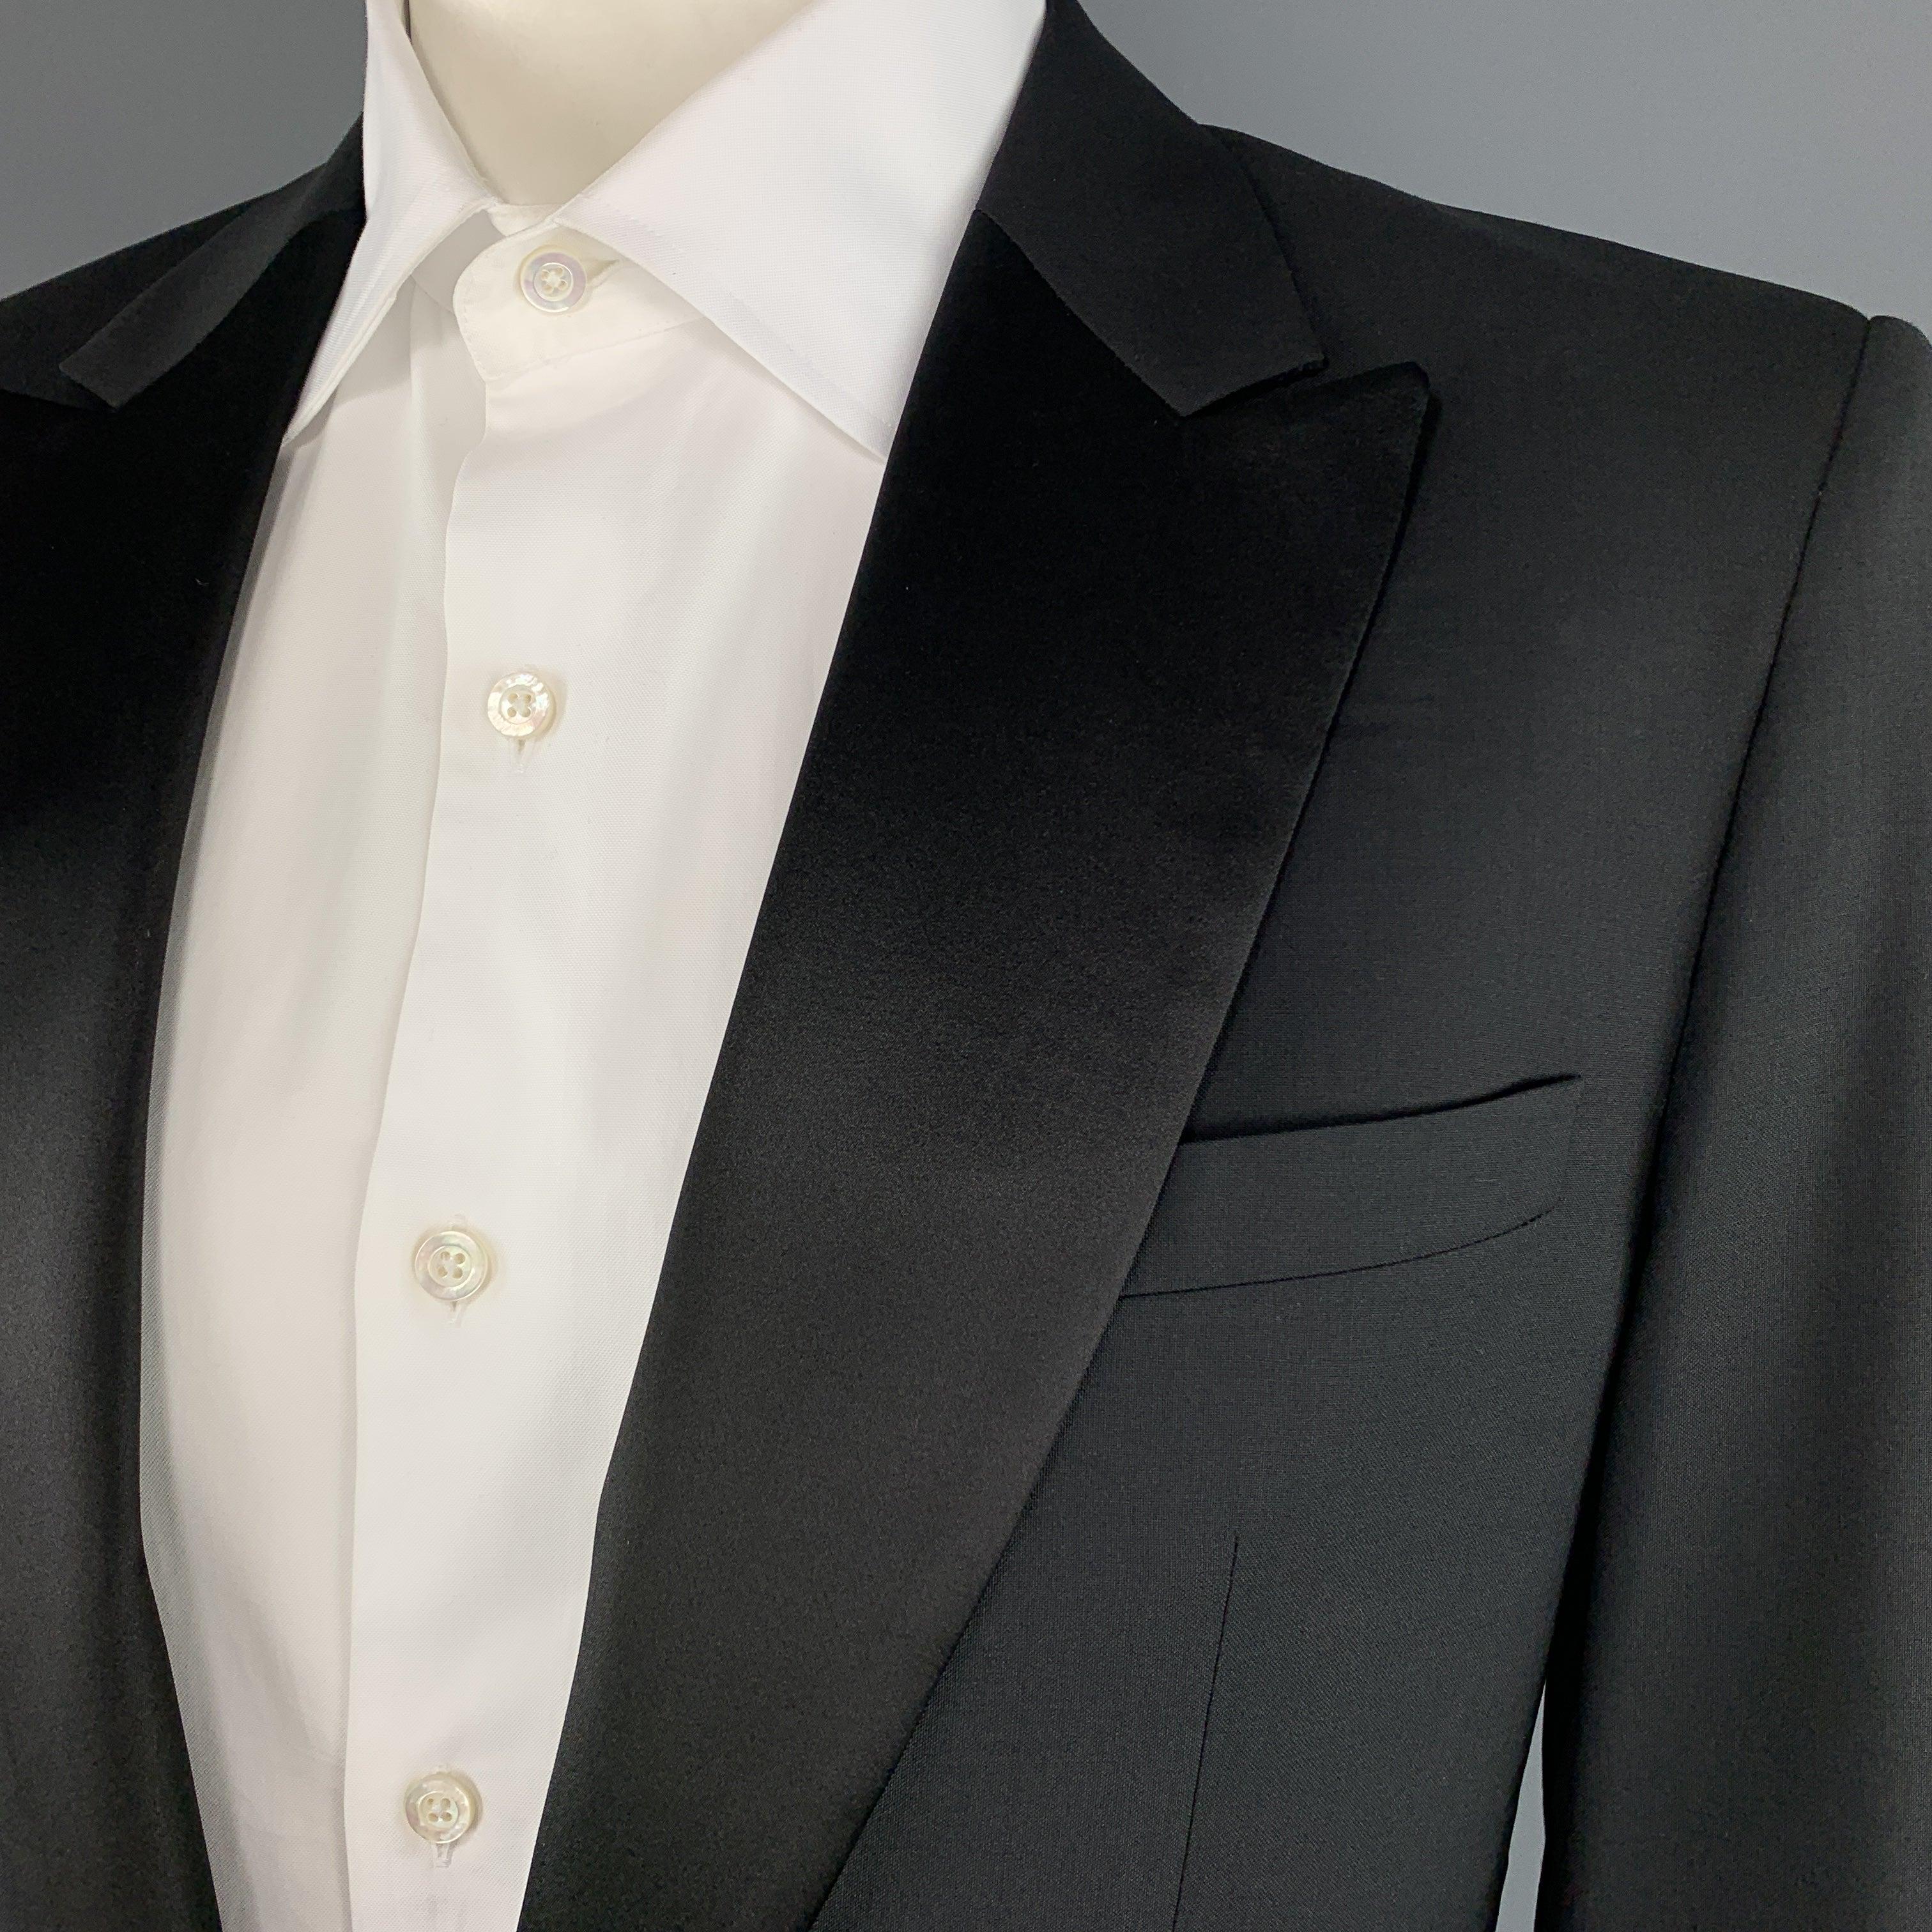 VIKTOR & ROLF Size 40 Black Wool Satin Peak Lapel Mirror Button Tuxedo Jacket In Excellent Condition For Sale In San Francisco, CA